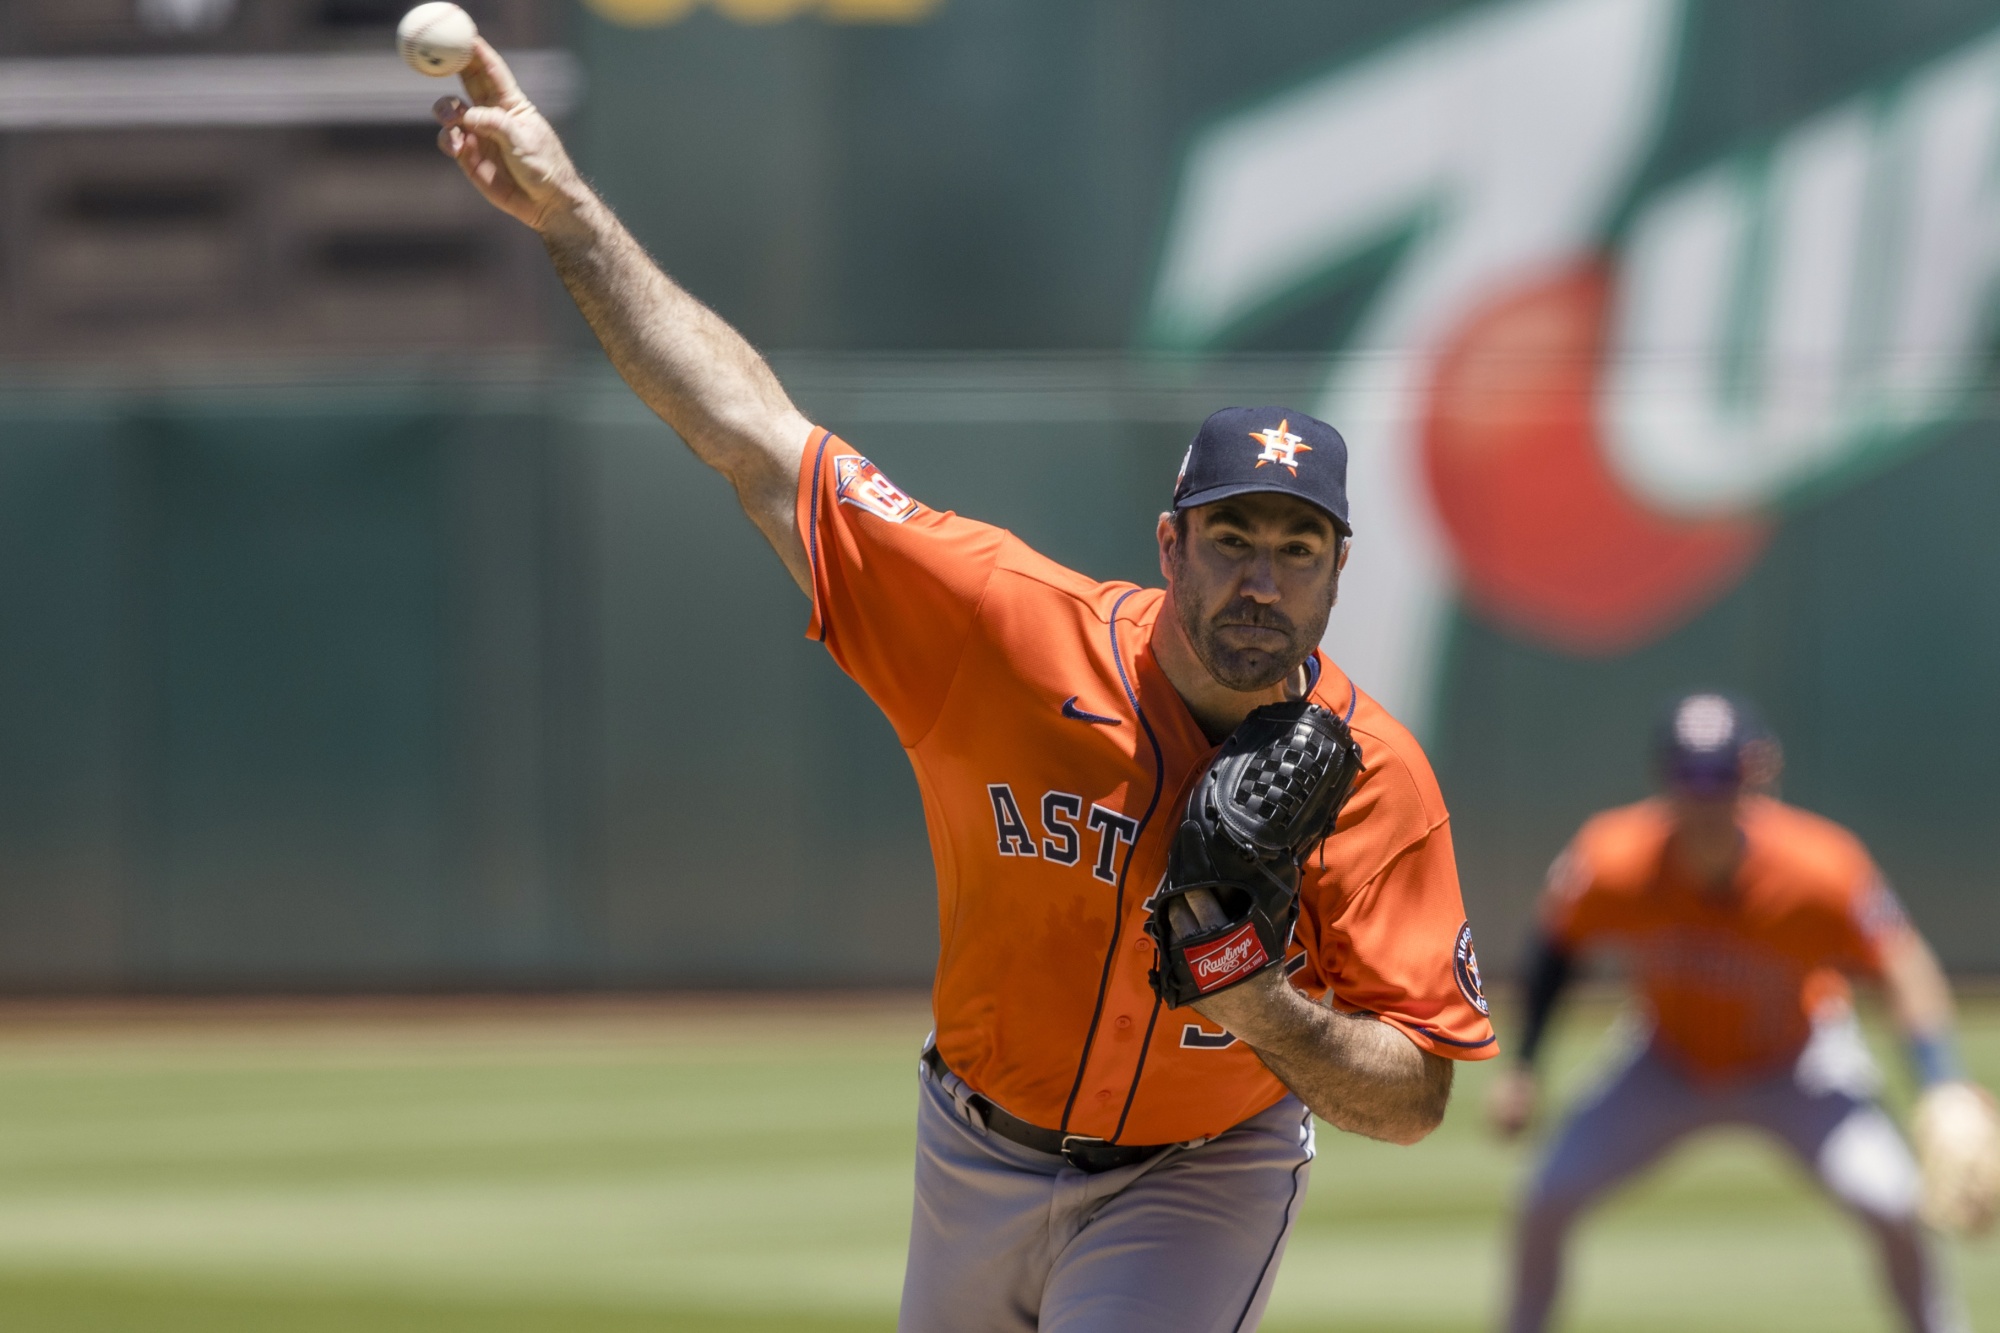 Astros' Justin Verlander pulled after six no-hit innings